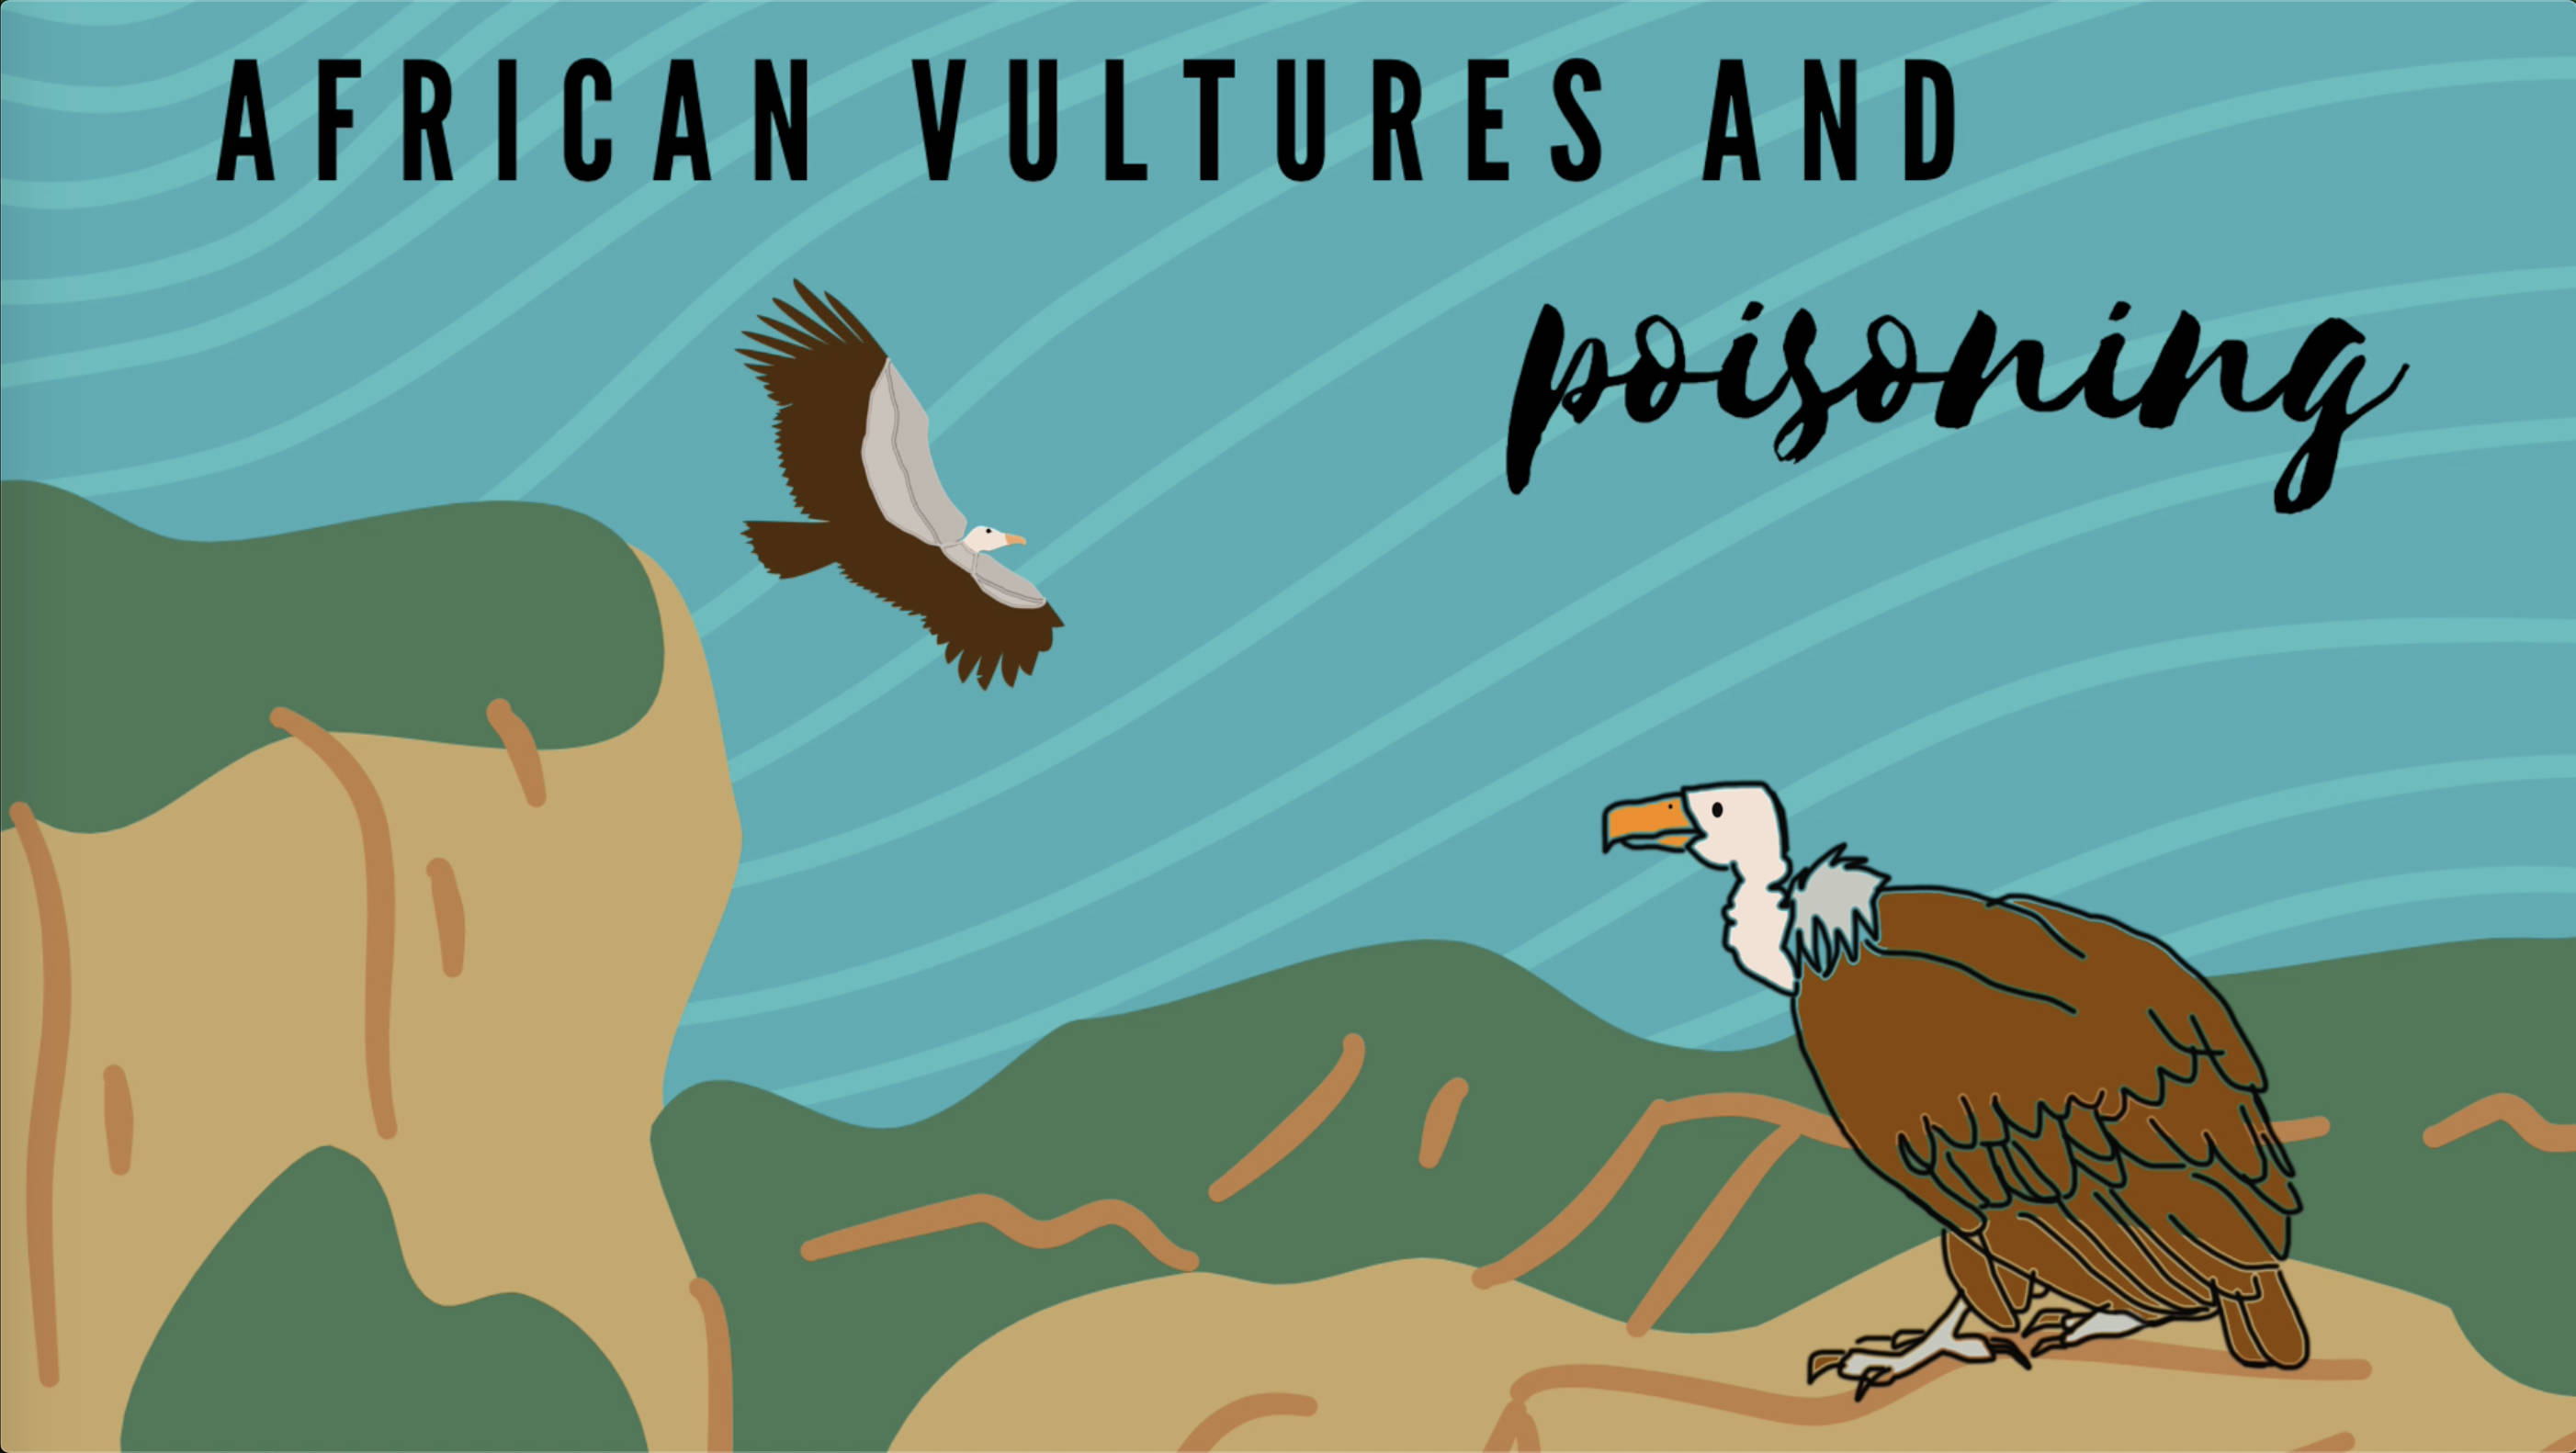 African Vulture Crisis Educational Video